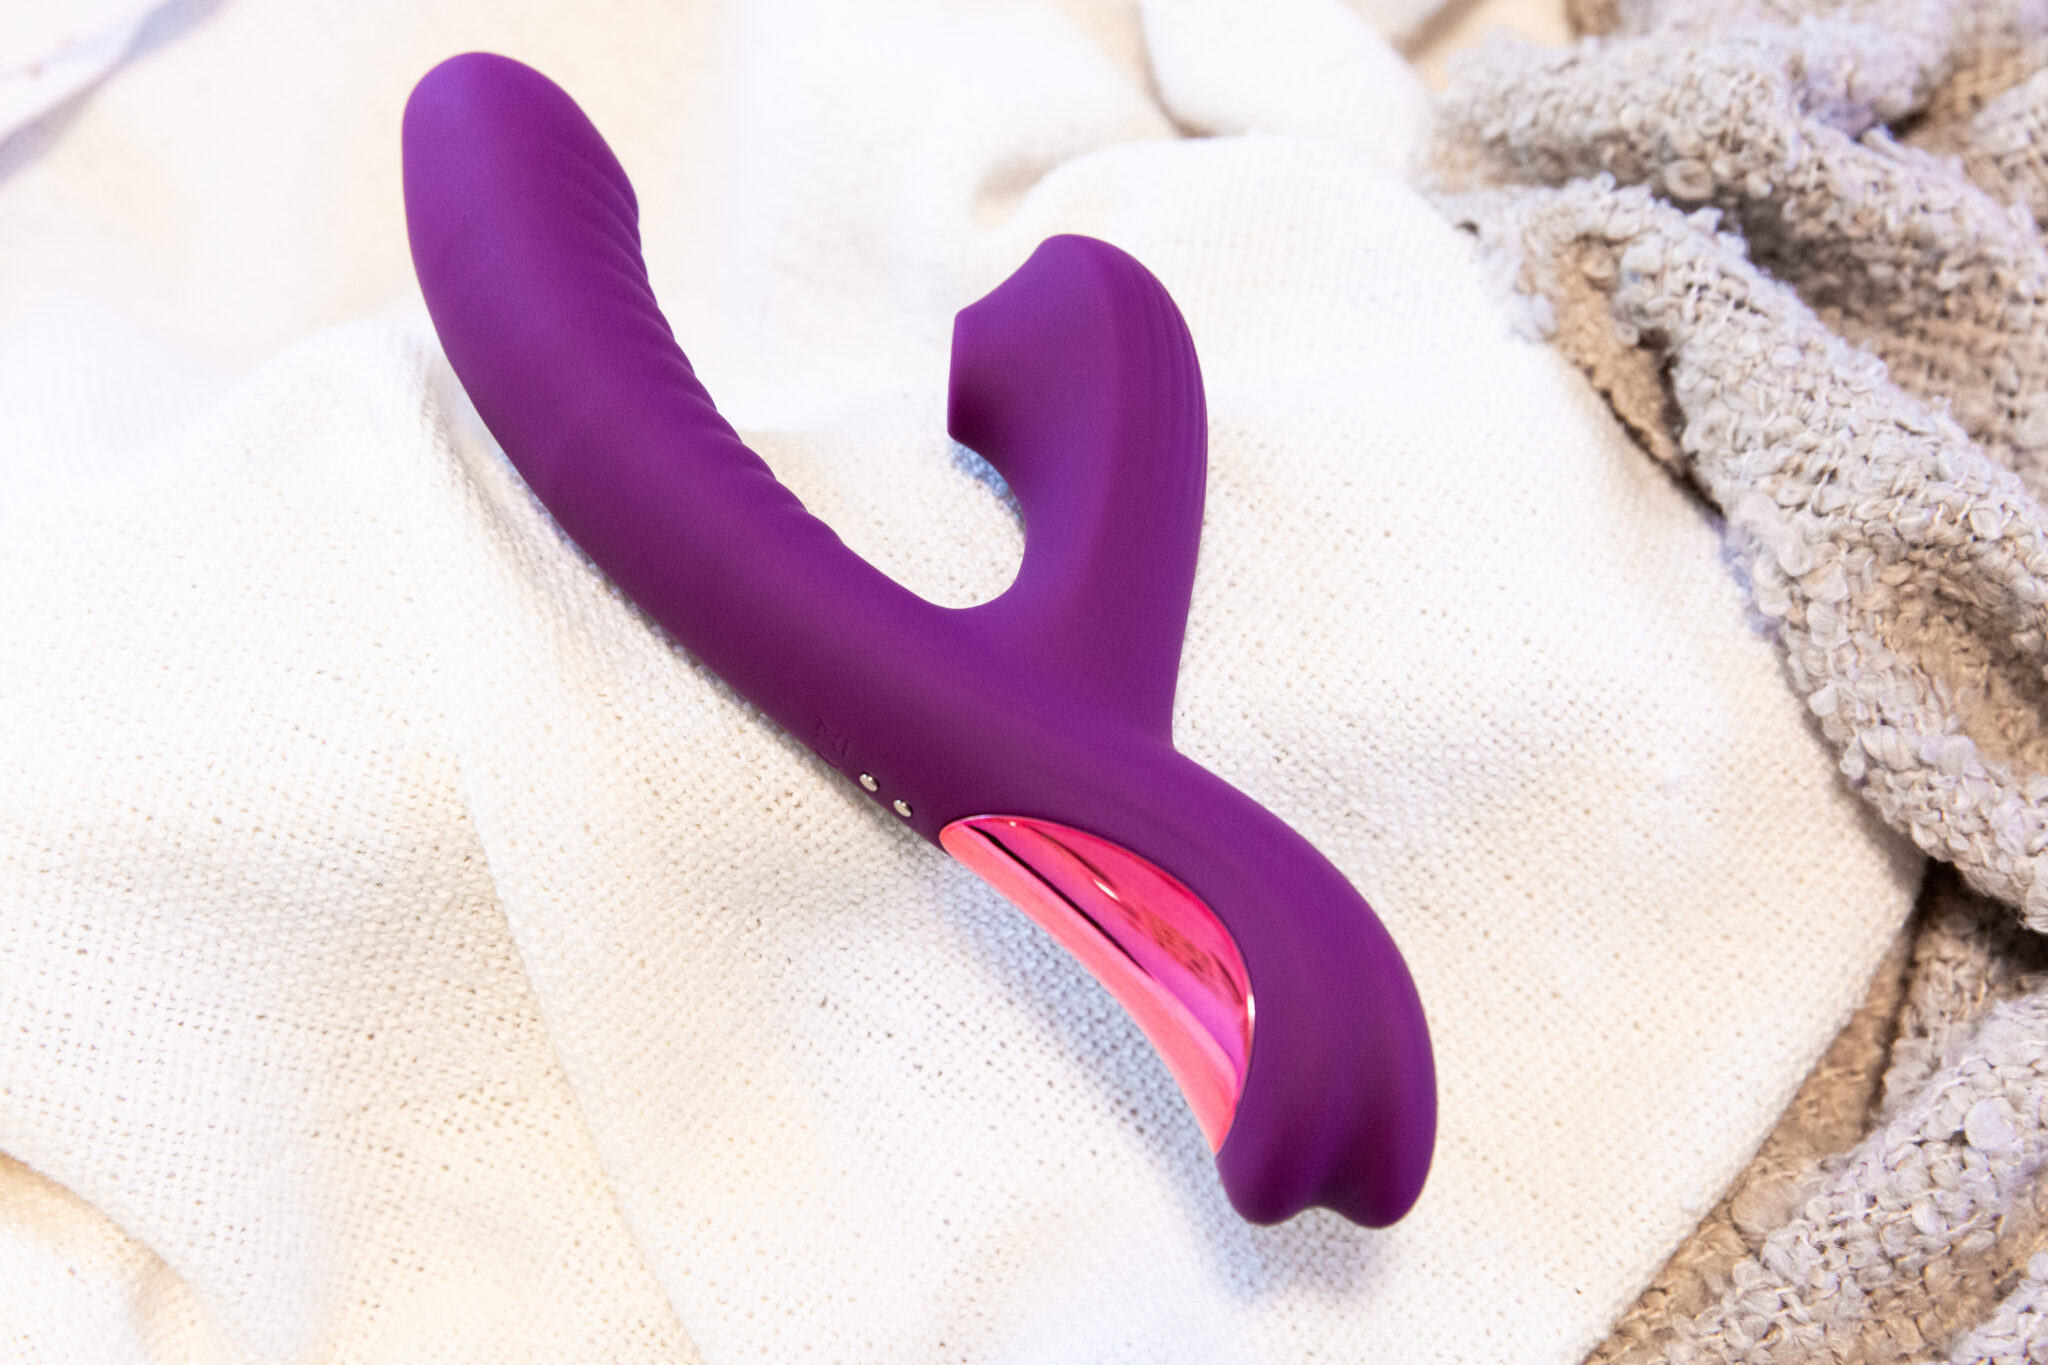 A full image of the sleek, purple Tracy's Dog Beta clit-sucking and g-spot thrusting sex toy.